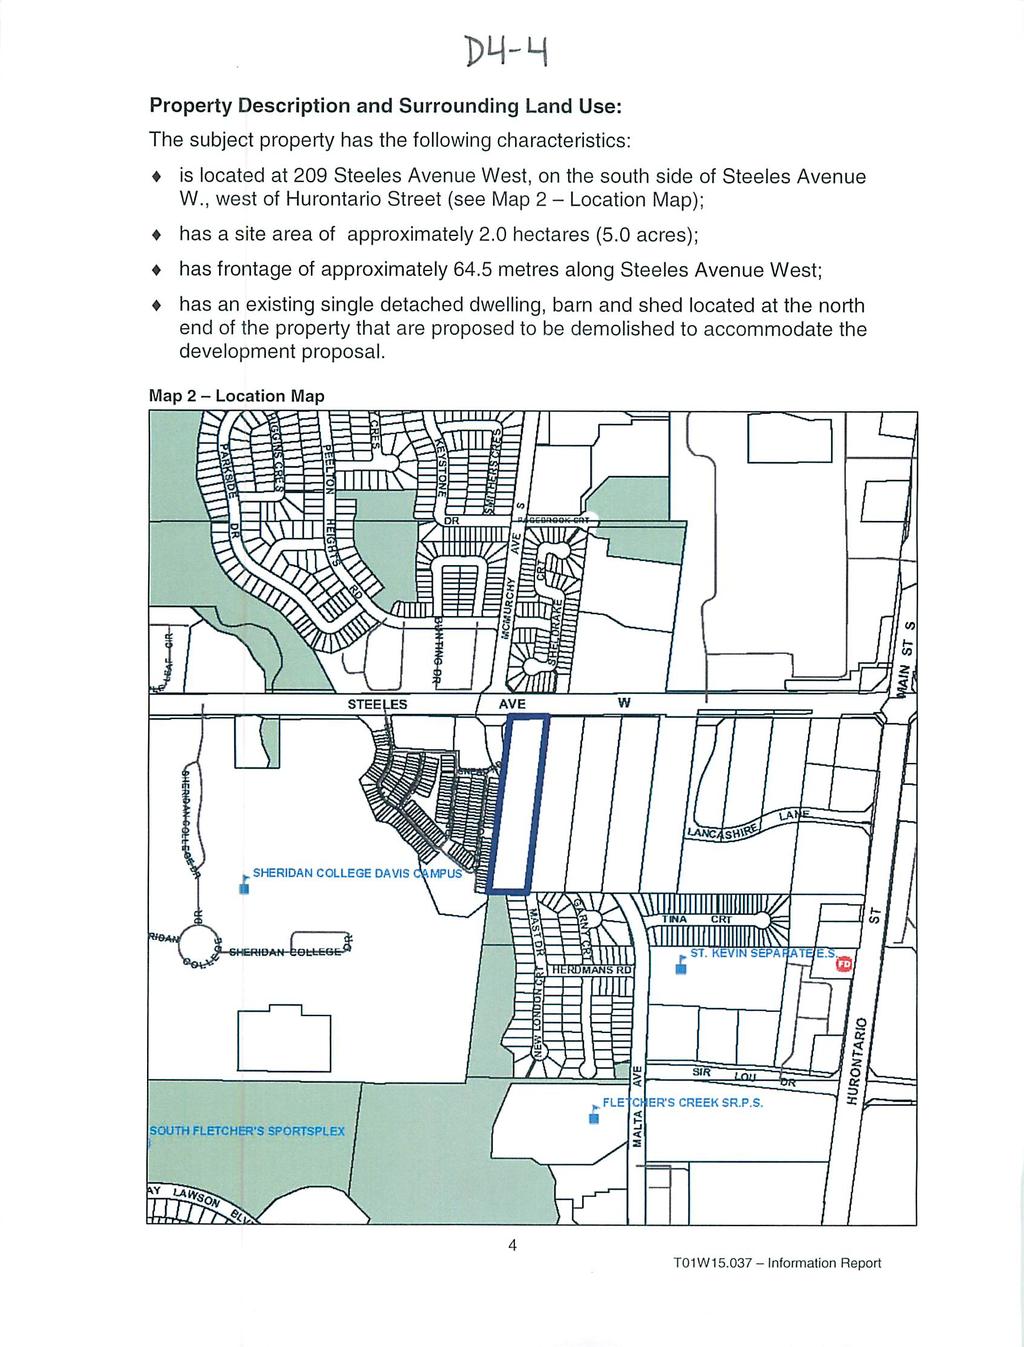 DM-4 Property Description and Surrounding Land Use: The subject property has the following characteristics: is located at 209 Steeles Avenue West, on the south side of Steeles Avenue W.